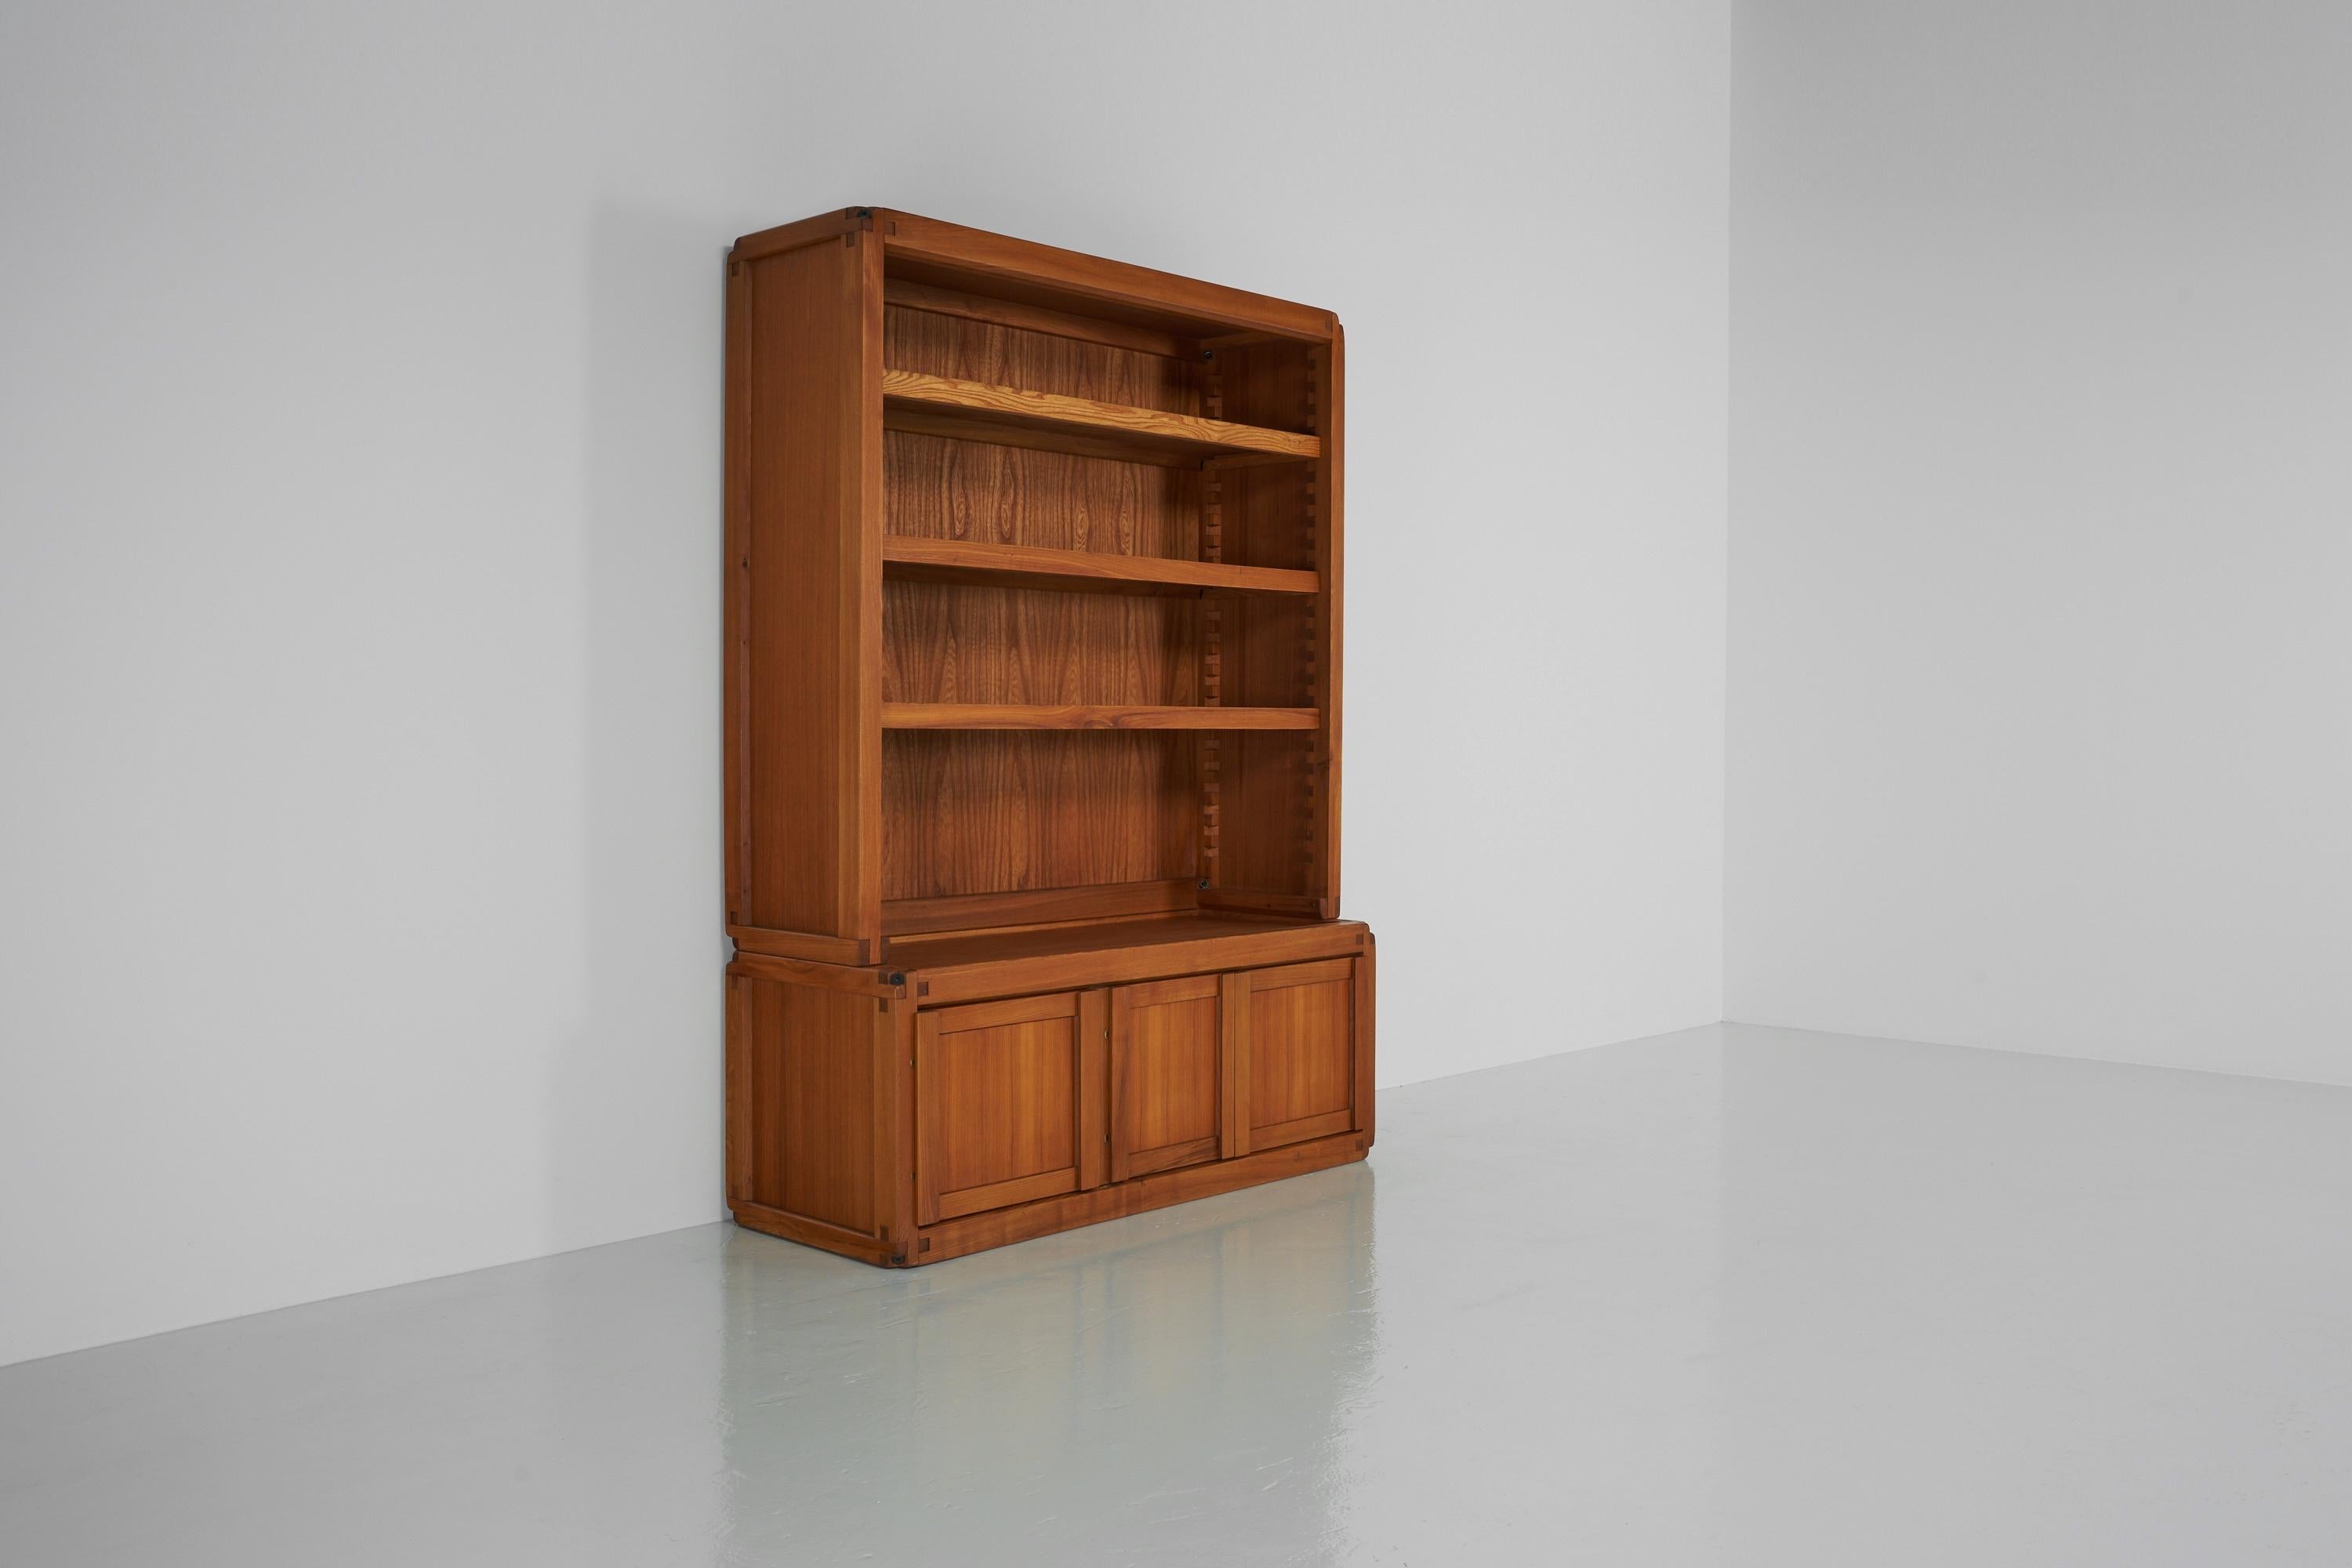 A truly beautiful and well preserved large sized B10 bookcase with adjustable shelves, designed by Pierre Chapo and made in his own atelier in France, 1960. The B10 is one of the more familiar designs that Chapo made, and this particular piece still